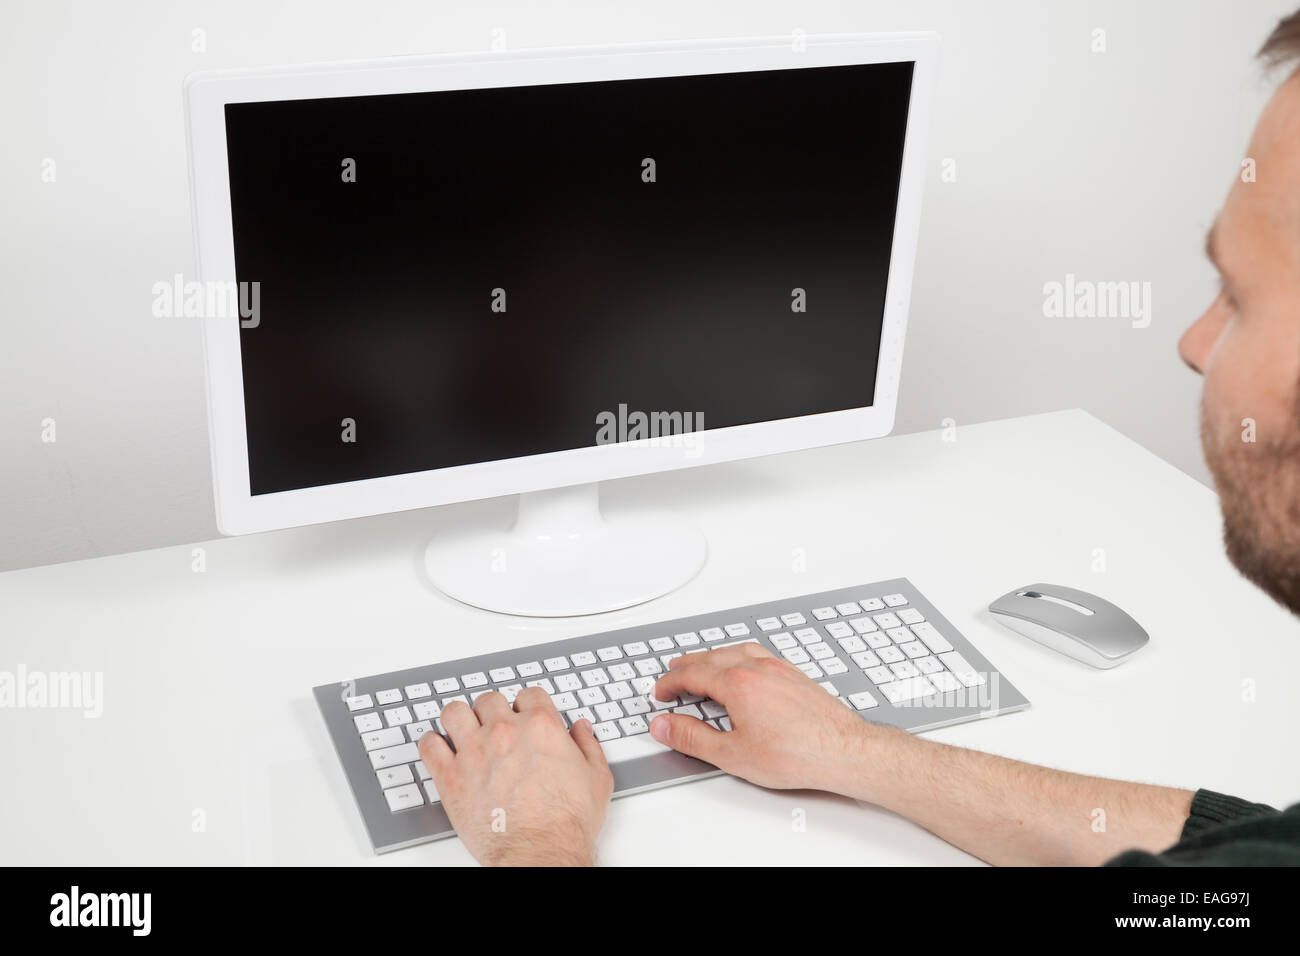 man typing on a computer Stock Photo